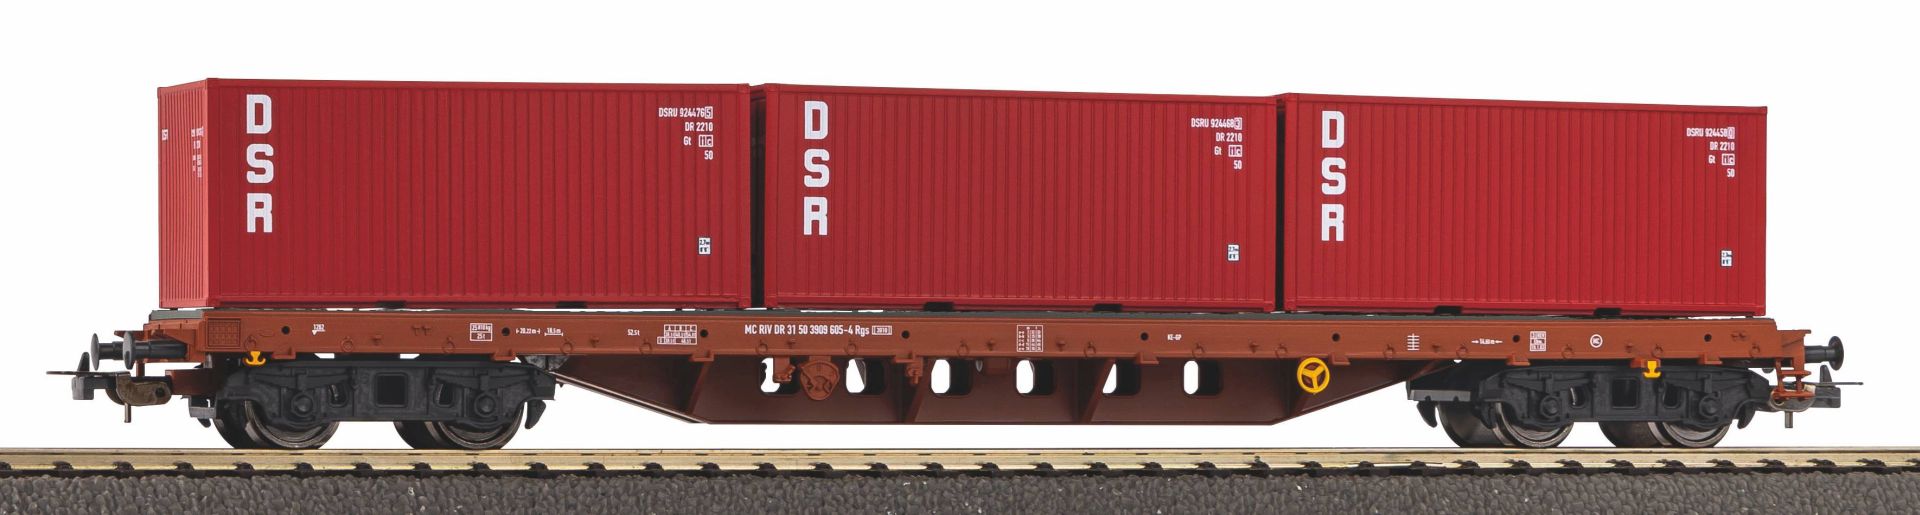 Piko 24500 - Containertragwagen mit 3 DSR-Containern, DR, Ep.IV